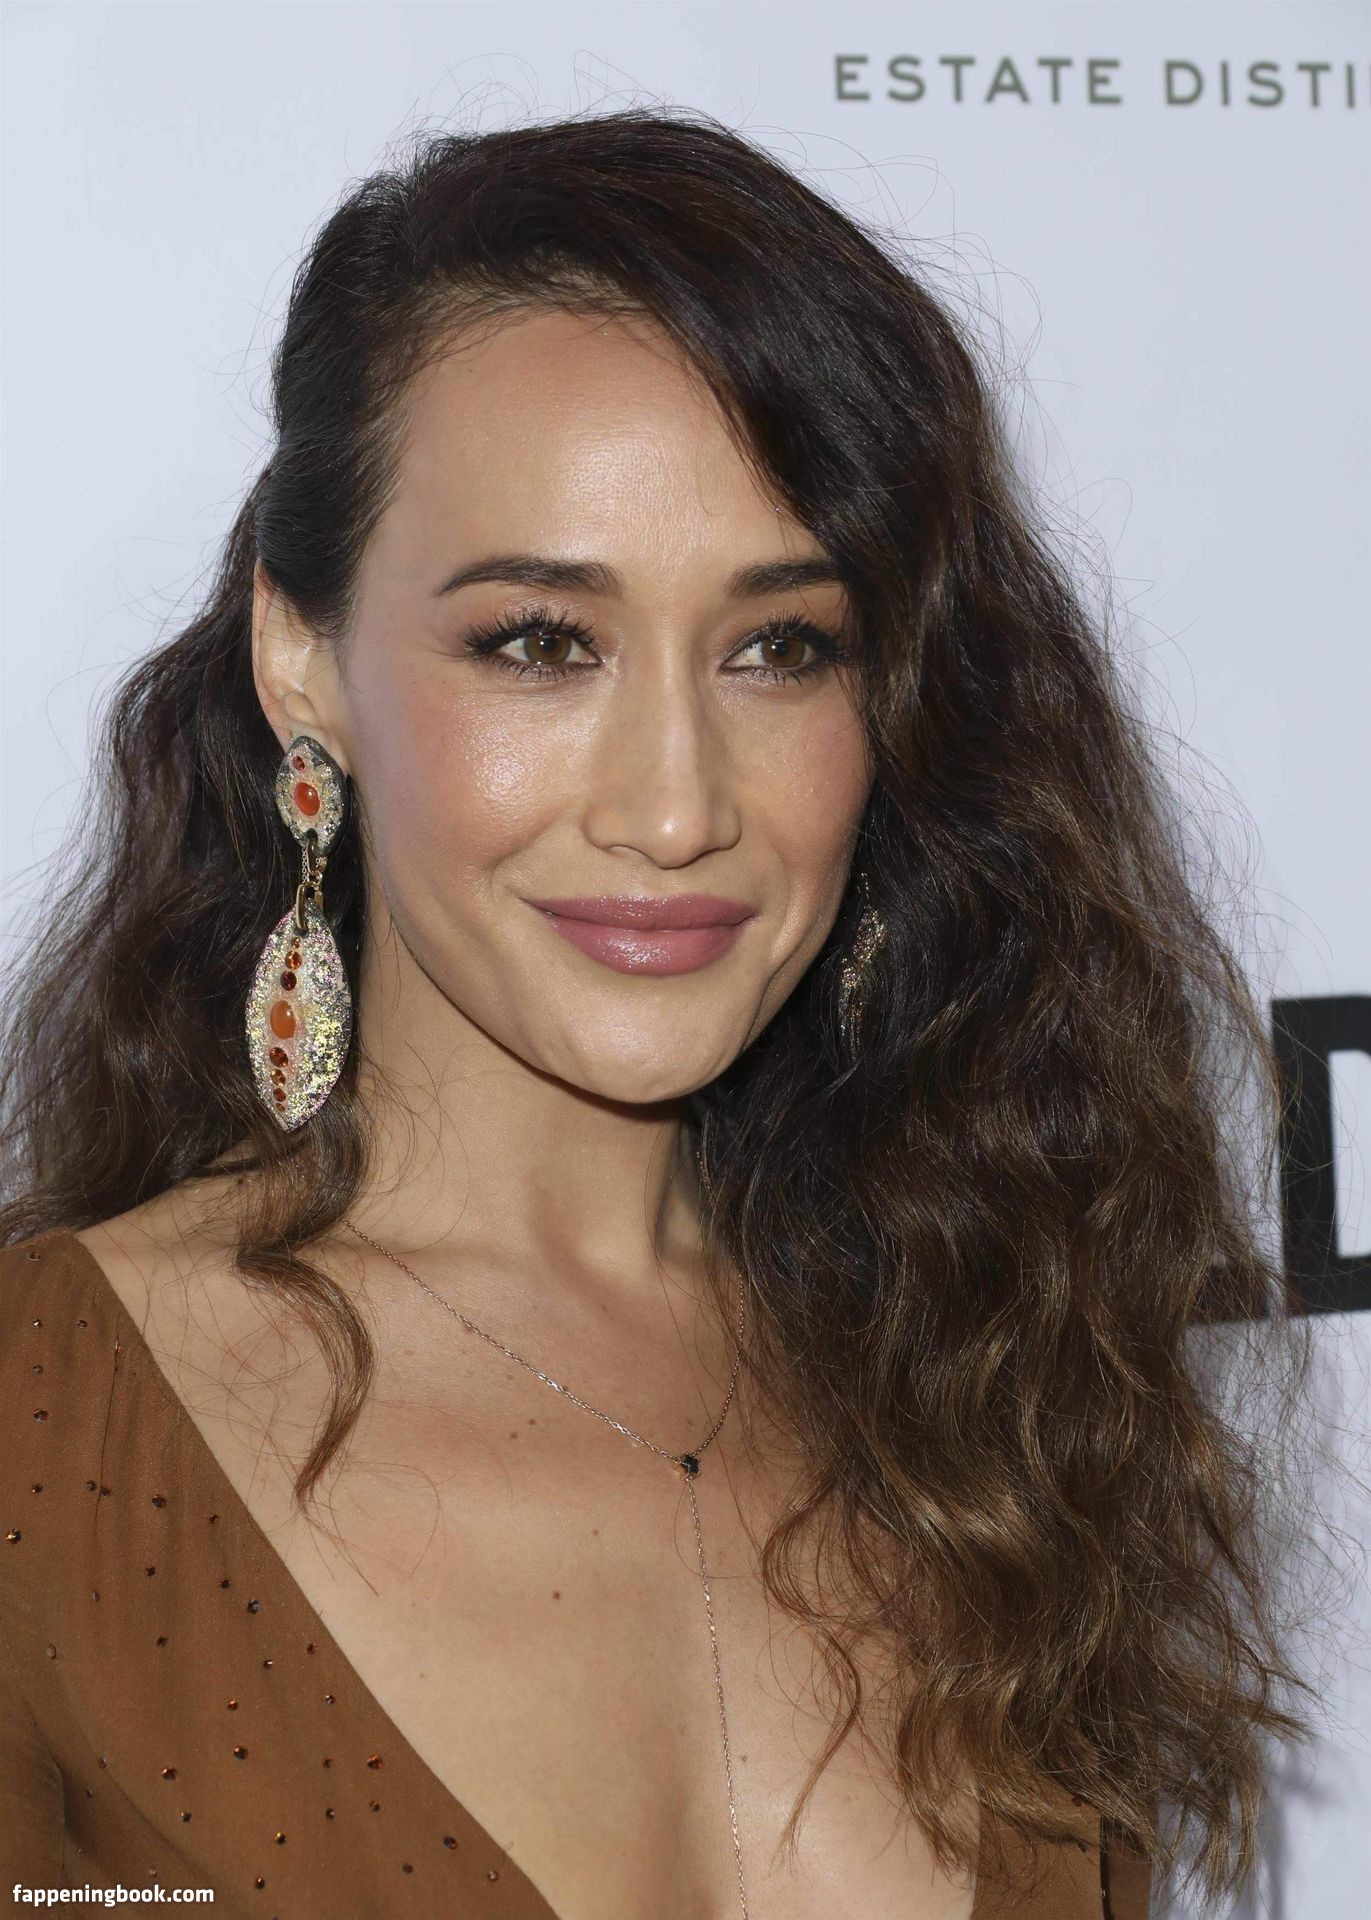 Maggie Q Nude Pics from Latest Fappening Leak! - All Sorts 